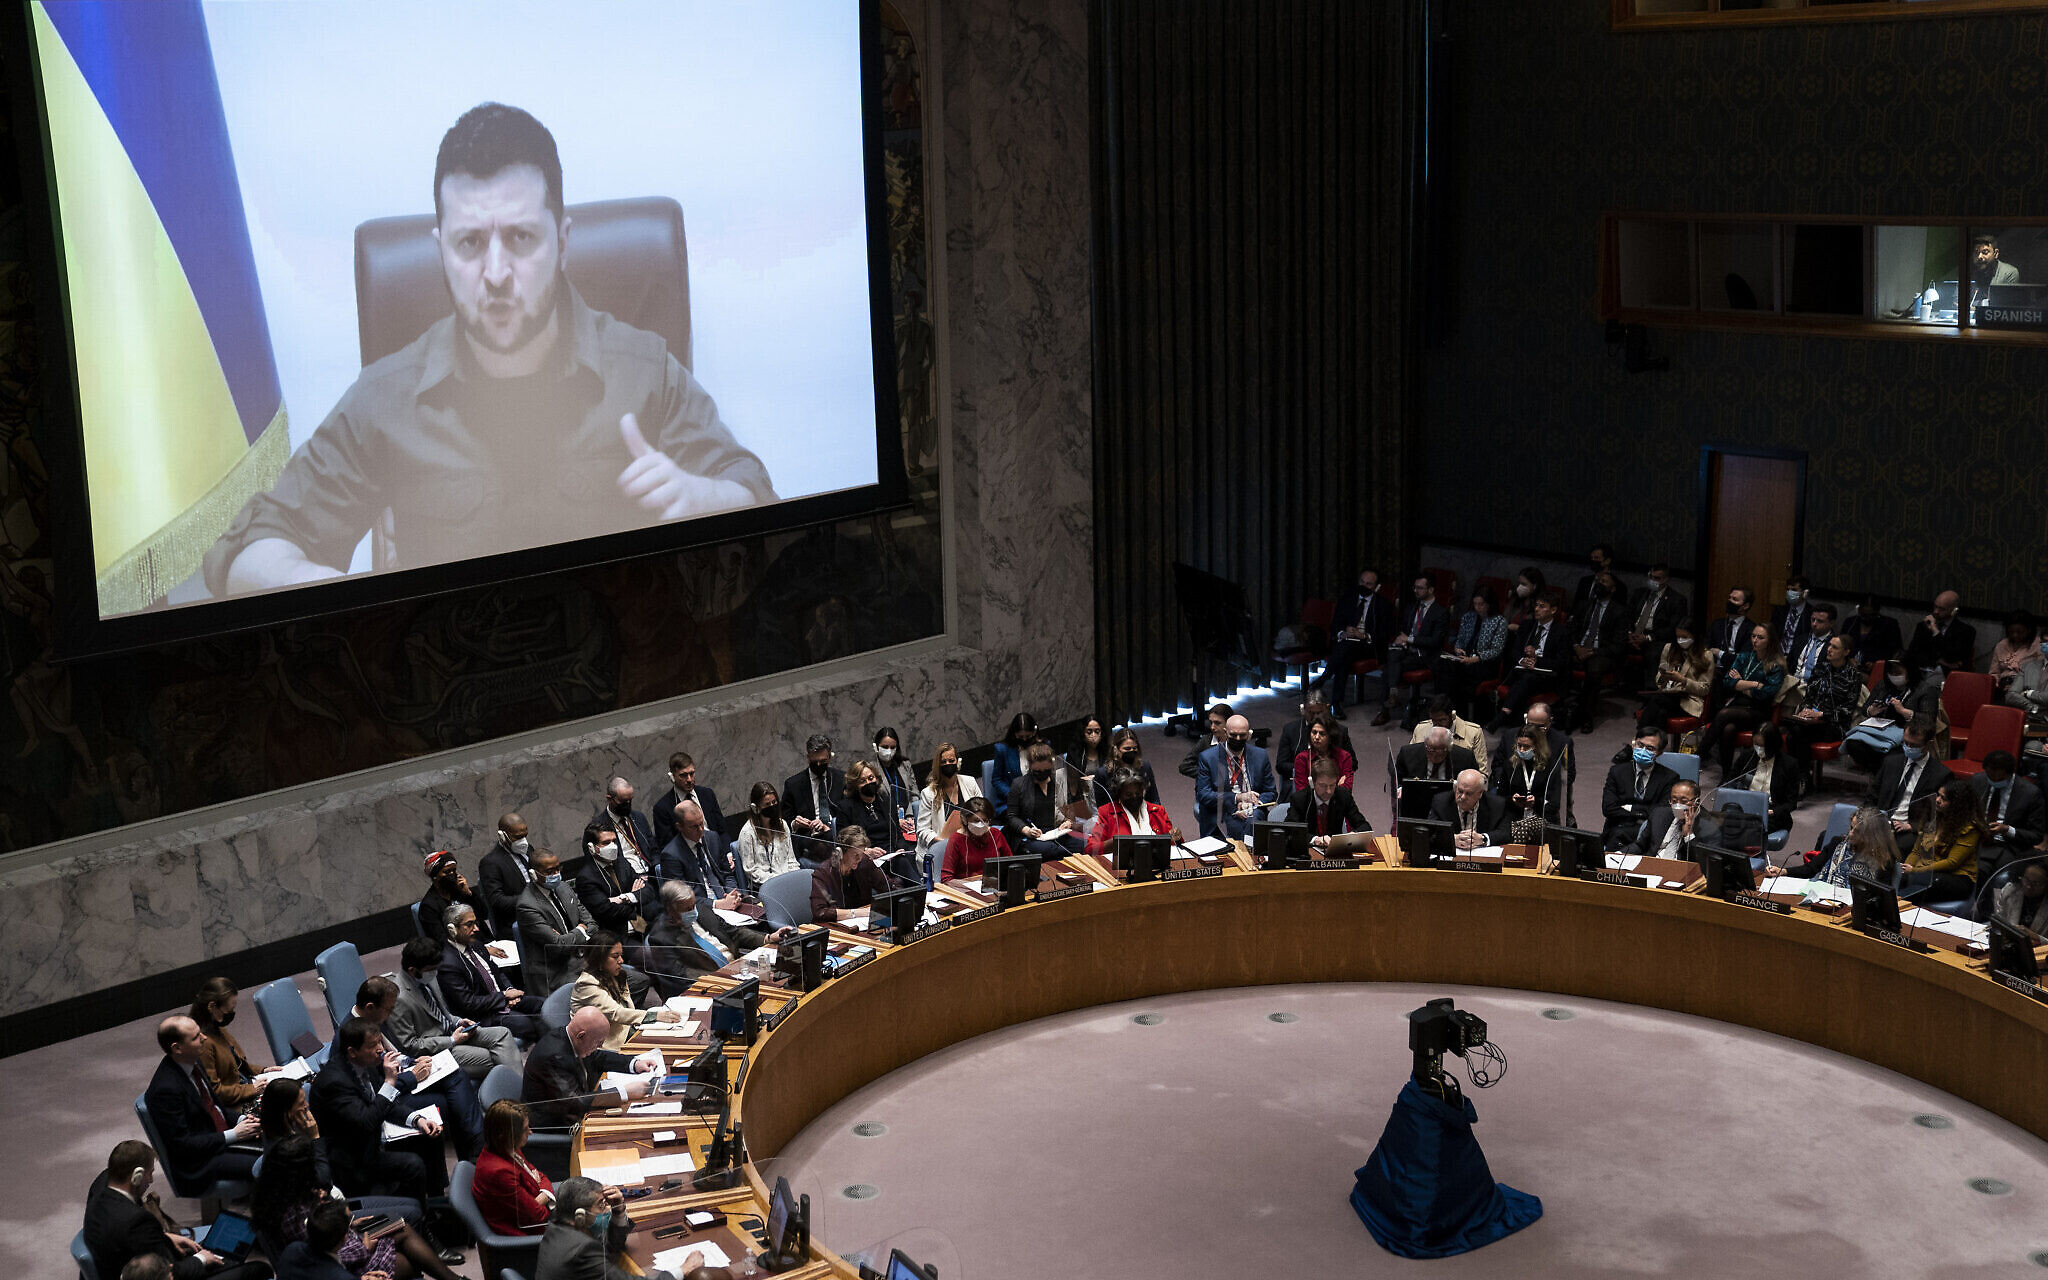 Zelensky tells UN Security Council Russia has committed worst atrocities  since WWII | The Times of Israel